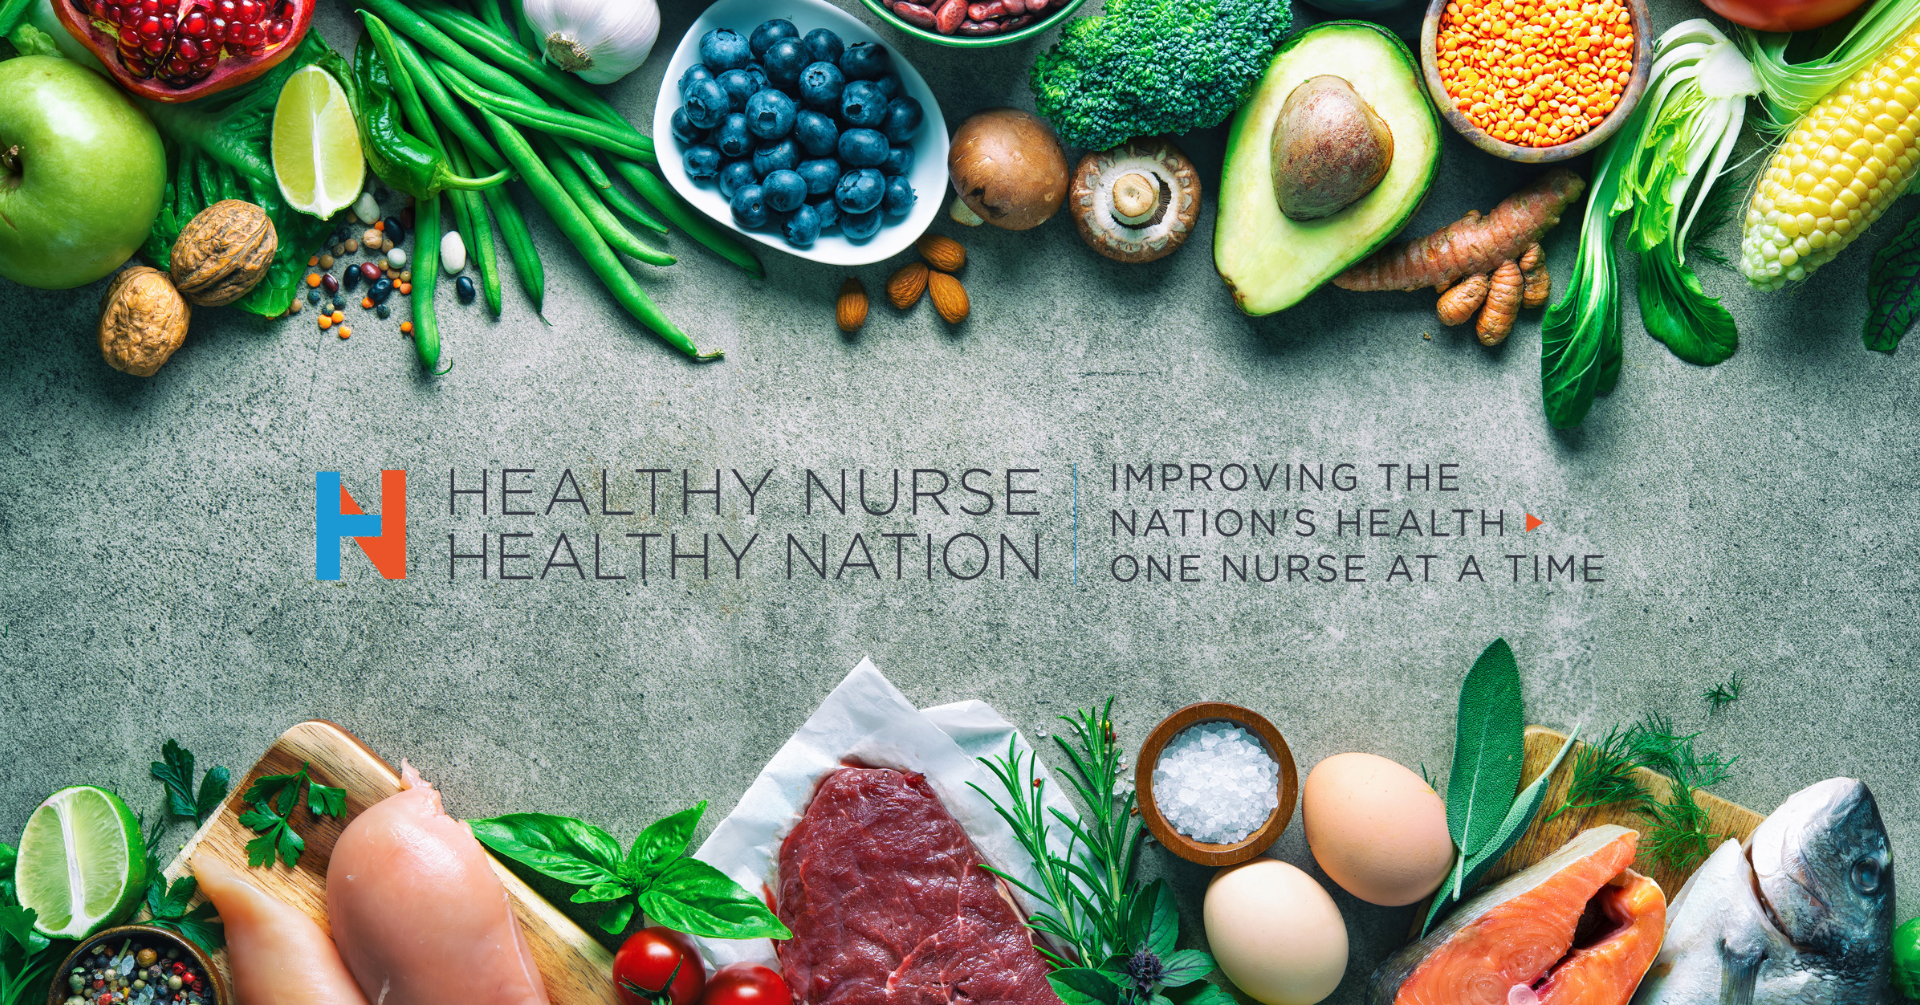 Healthy Nurse, Healthy Nation™ Blog - 14+ Healthy Food Substitutions For More Mindful Meals 4338